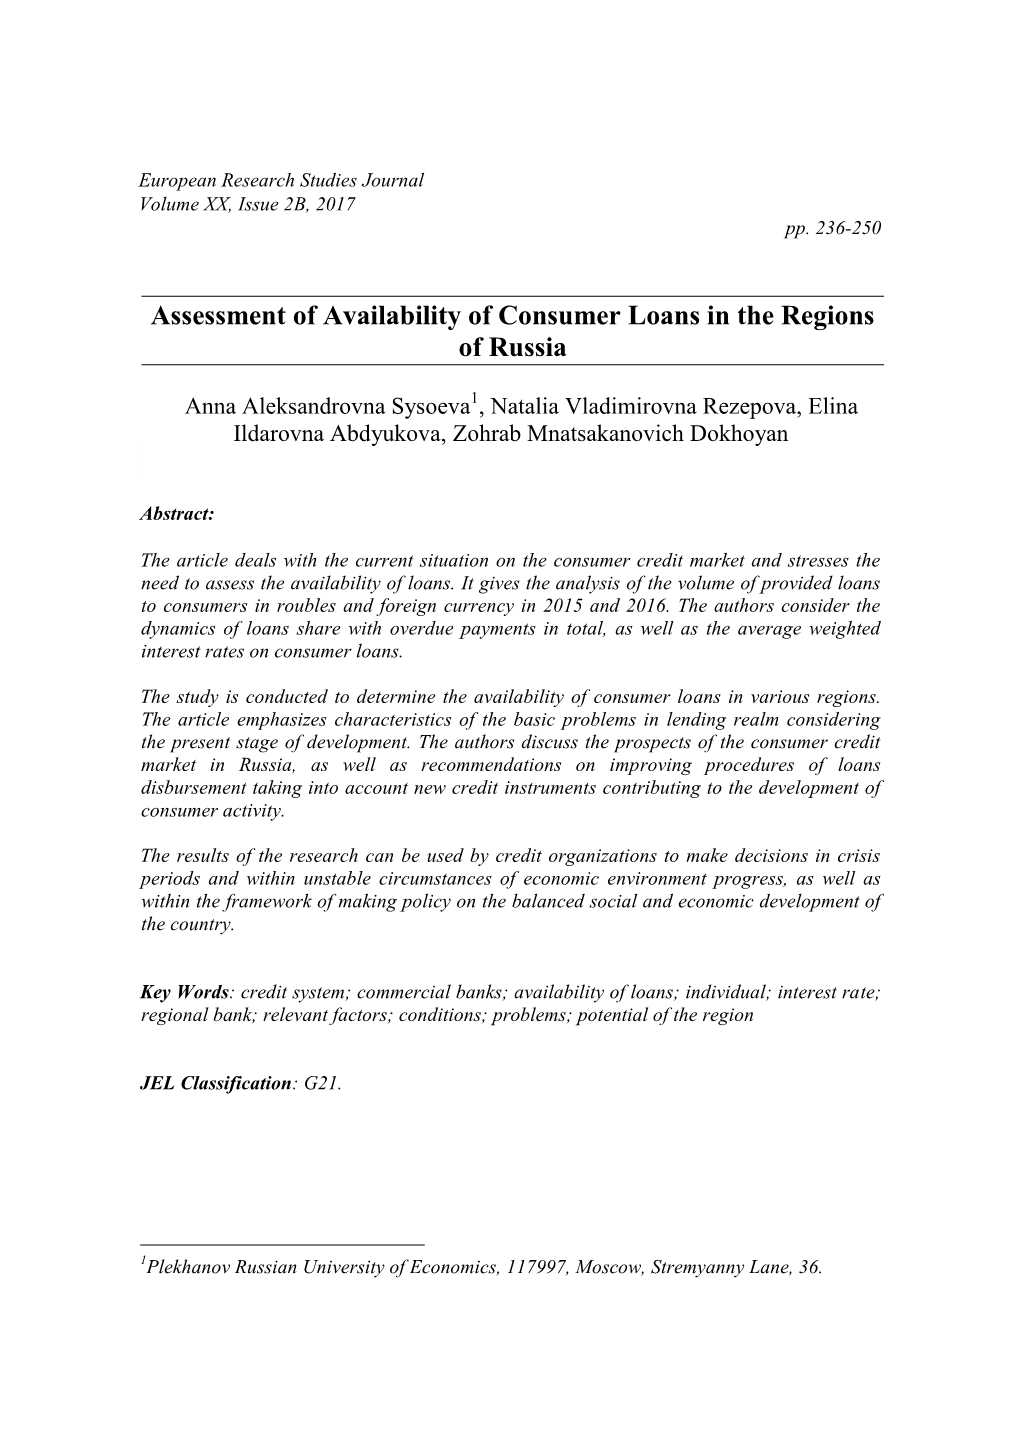 Assessment of Availability of Consumer Loans in the Regions of Russia